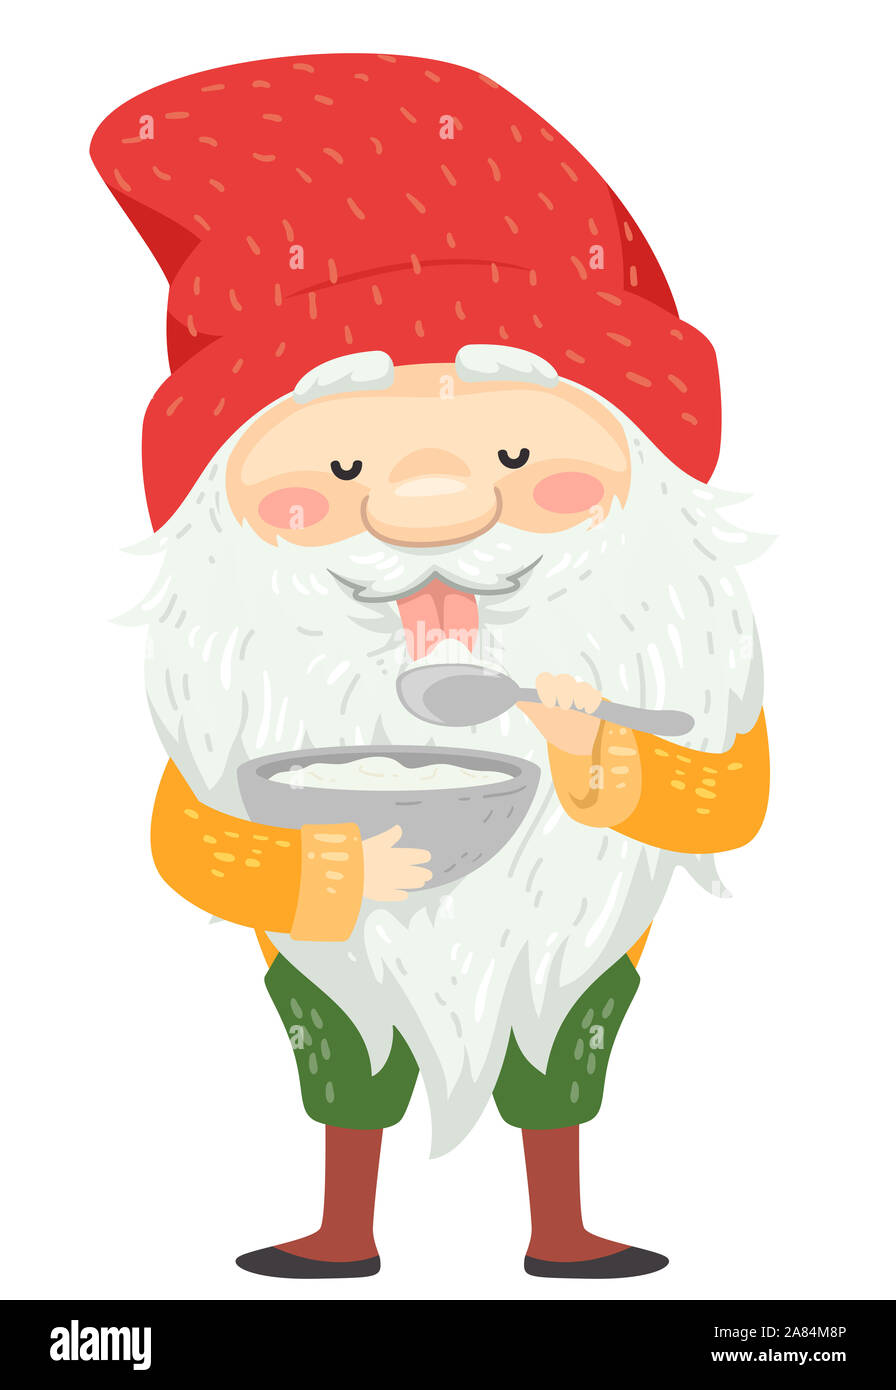 Illustration of an Icelandic Yule Lad with Long White Beard and Mustache Wearing Red Bonnet Licking Skyr Off a Spoon and Holding a Bowl Full of It Stock Photo